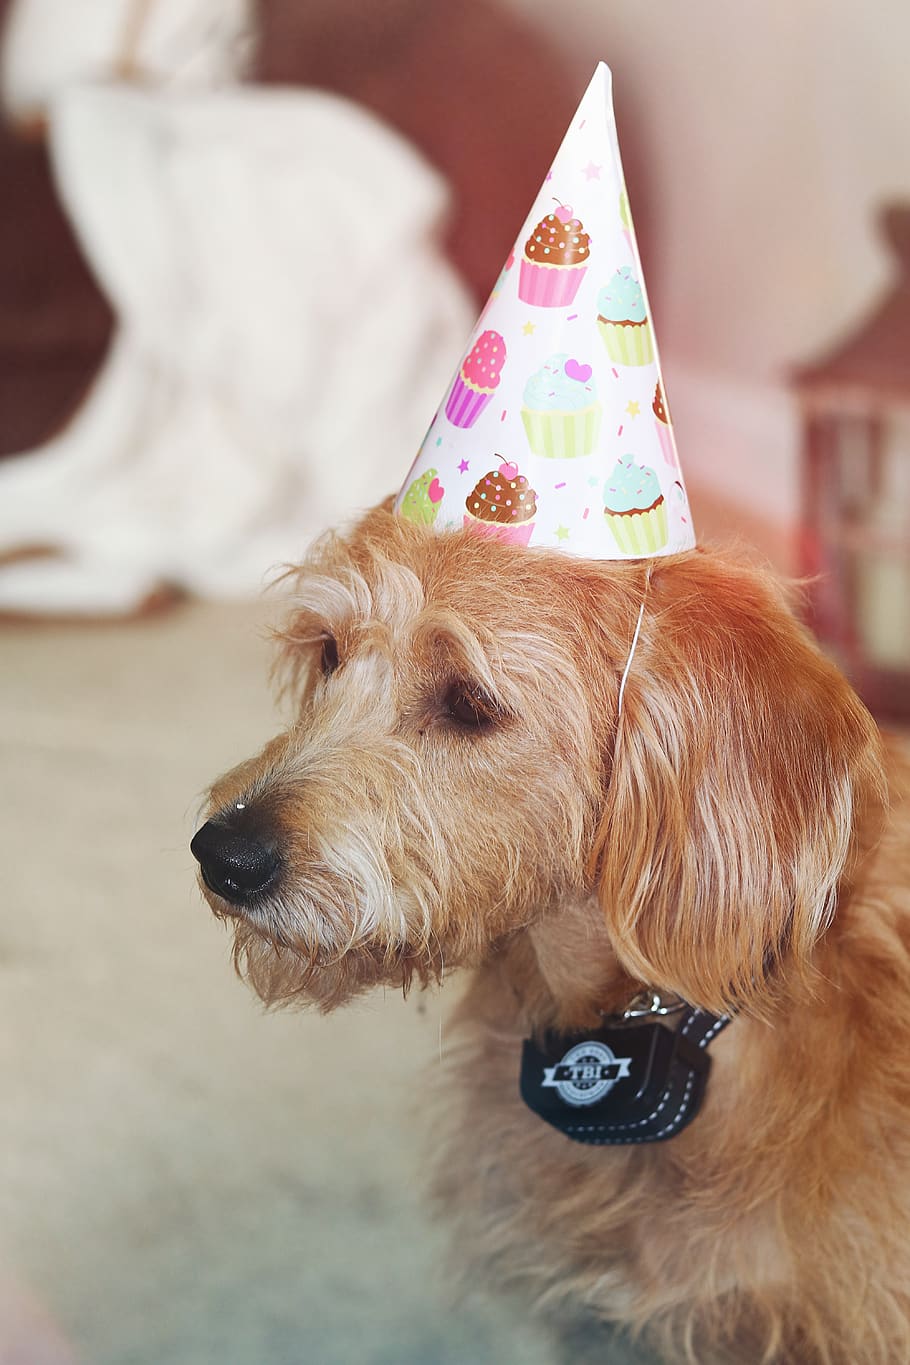 apparel, clothing, dog, mammal, pet, animal, canine, hat, party hat